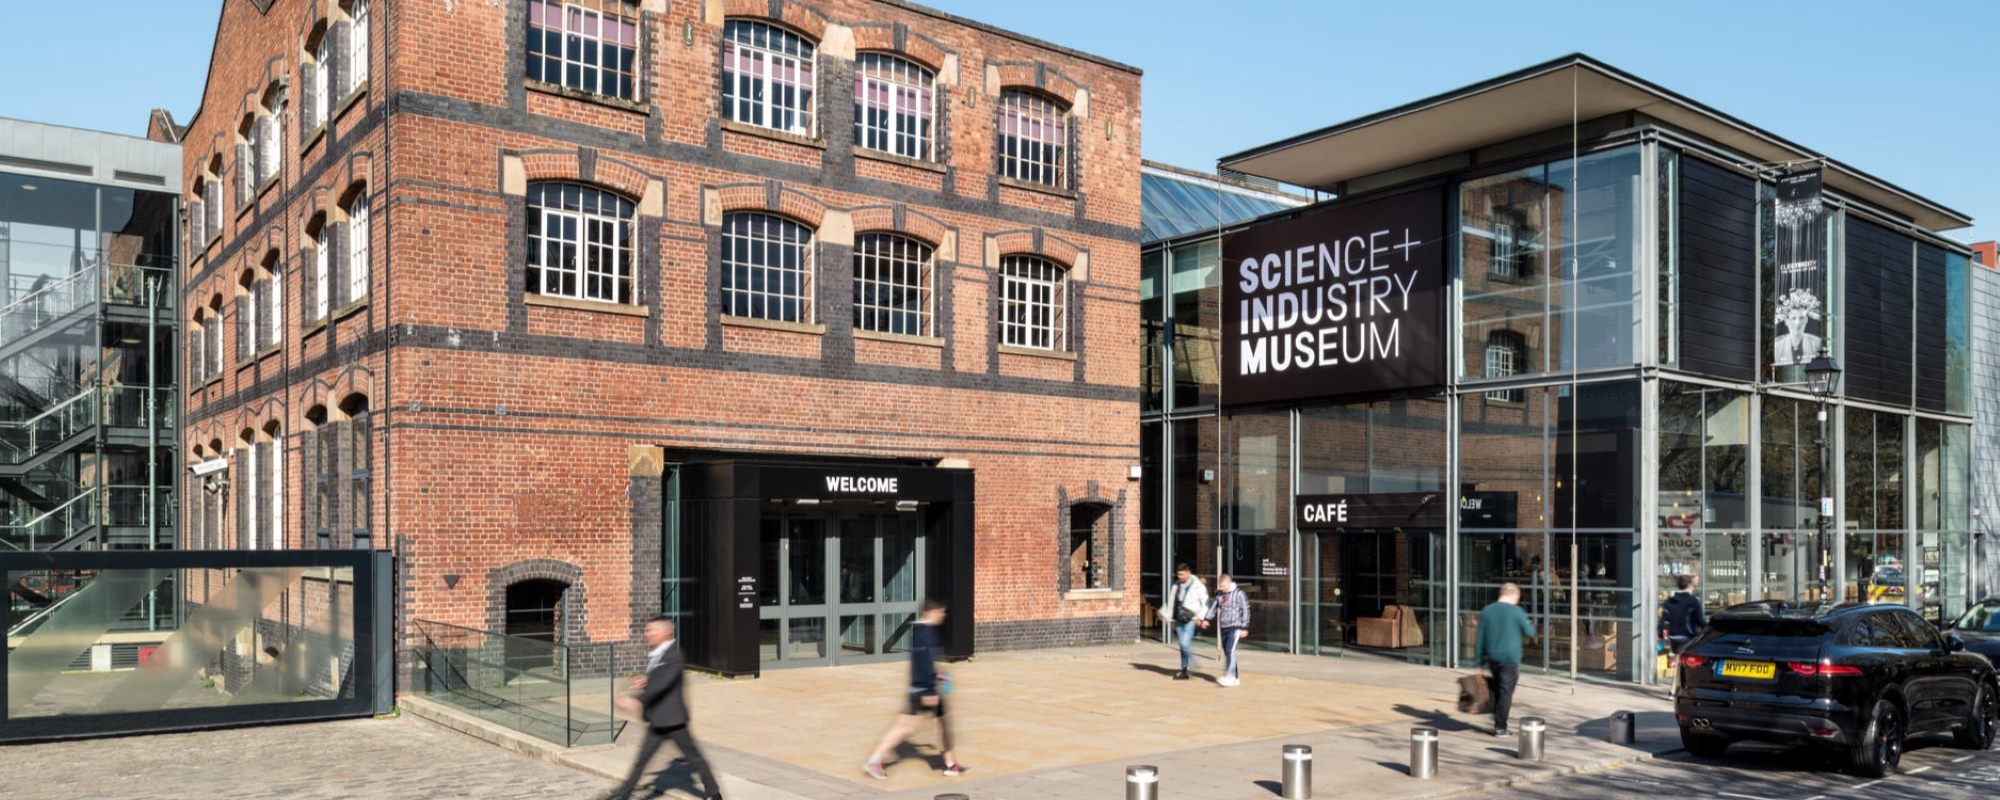 Science Industry Museum Manchester